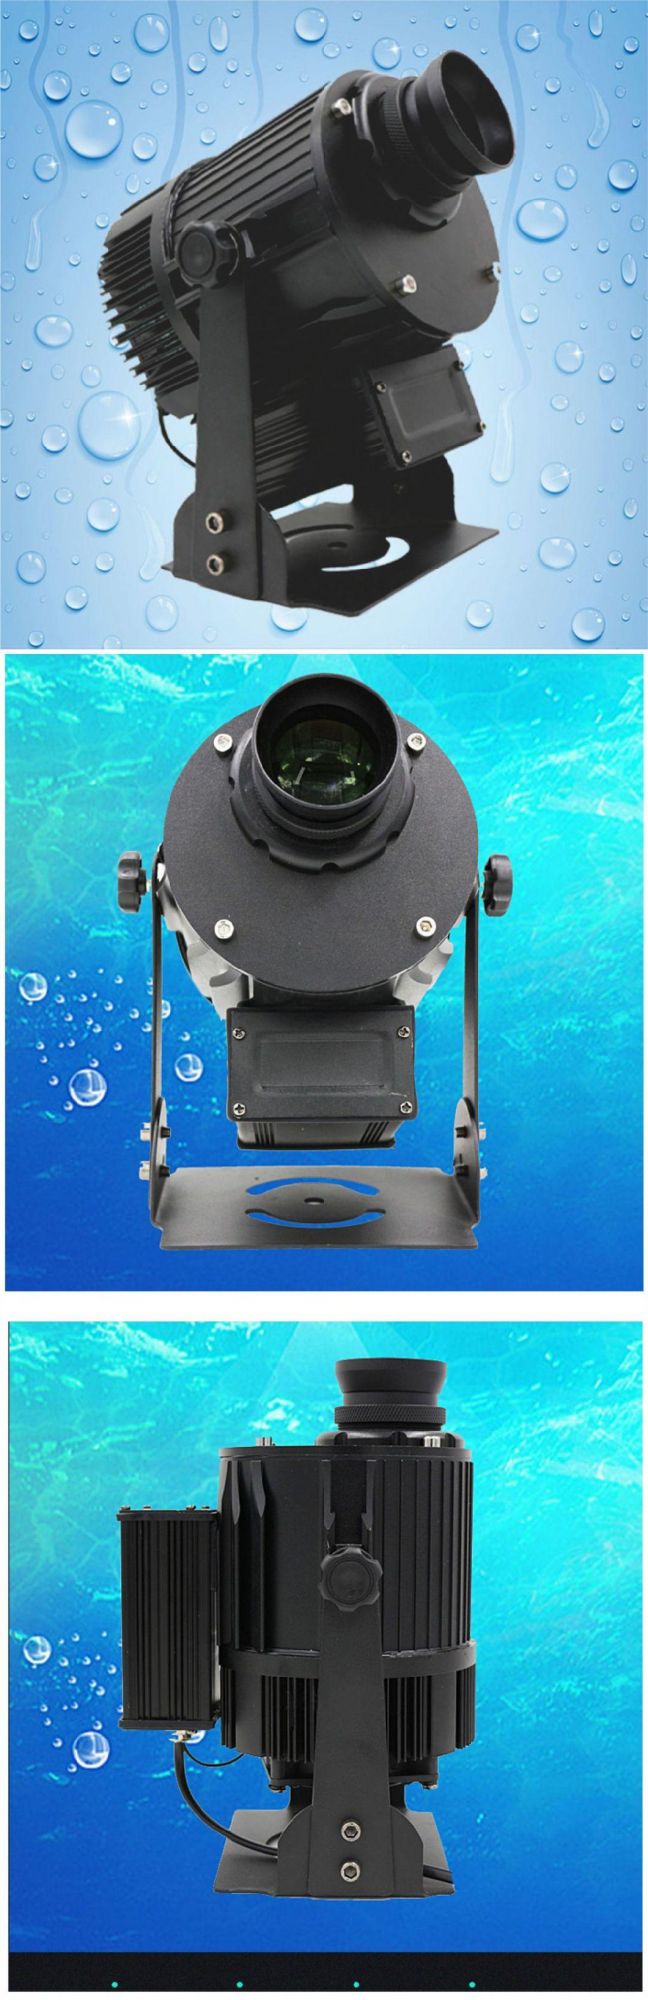 Hot Sale Outdoor Water Wave LED Garden Decoration Projector Light